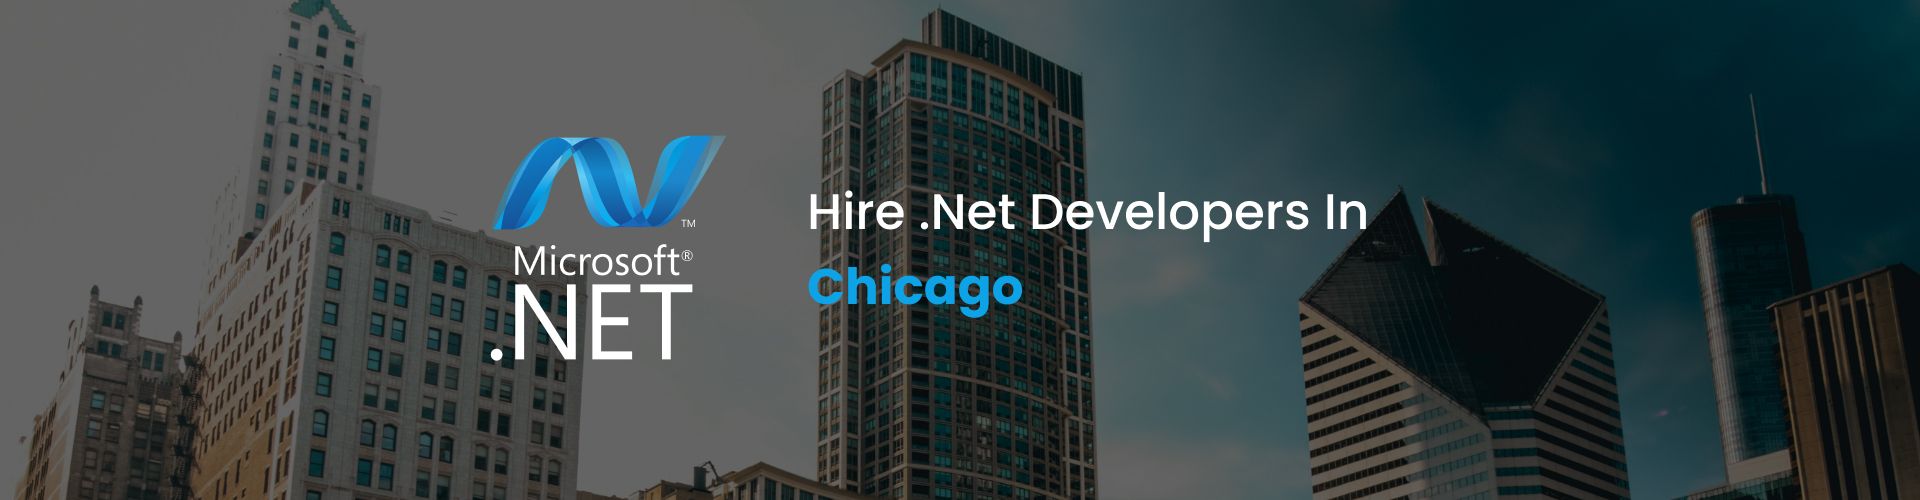 hire .net developers in chicago